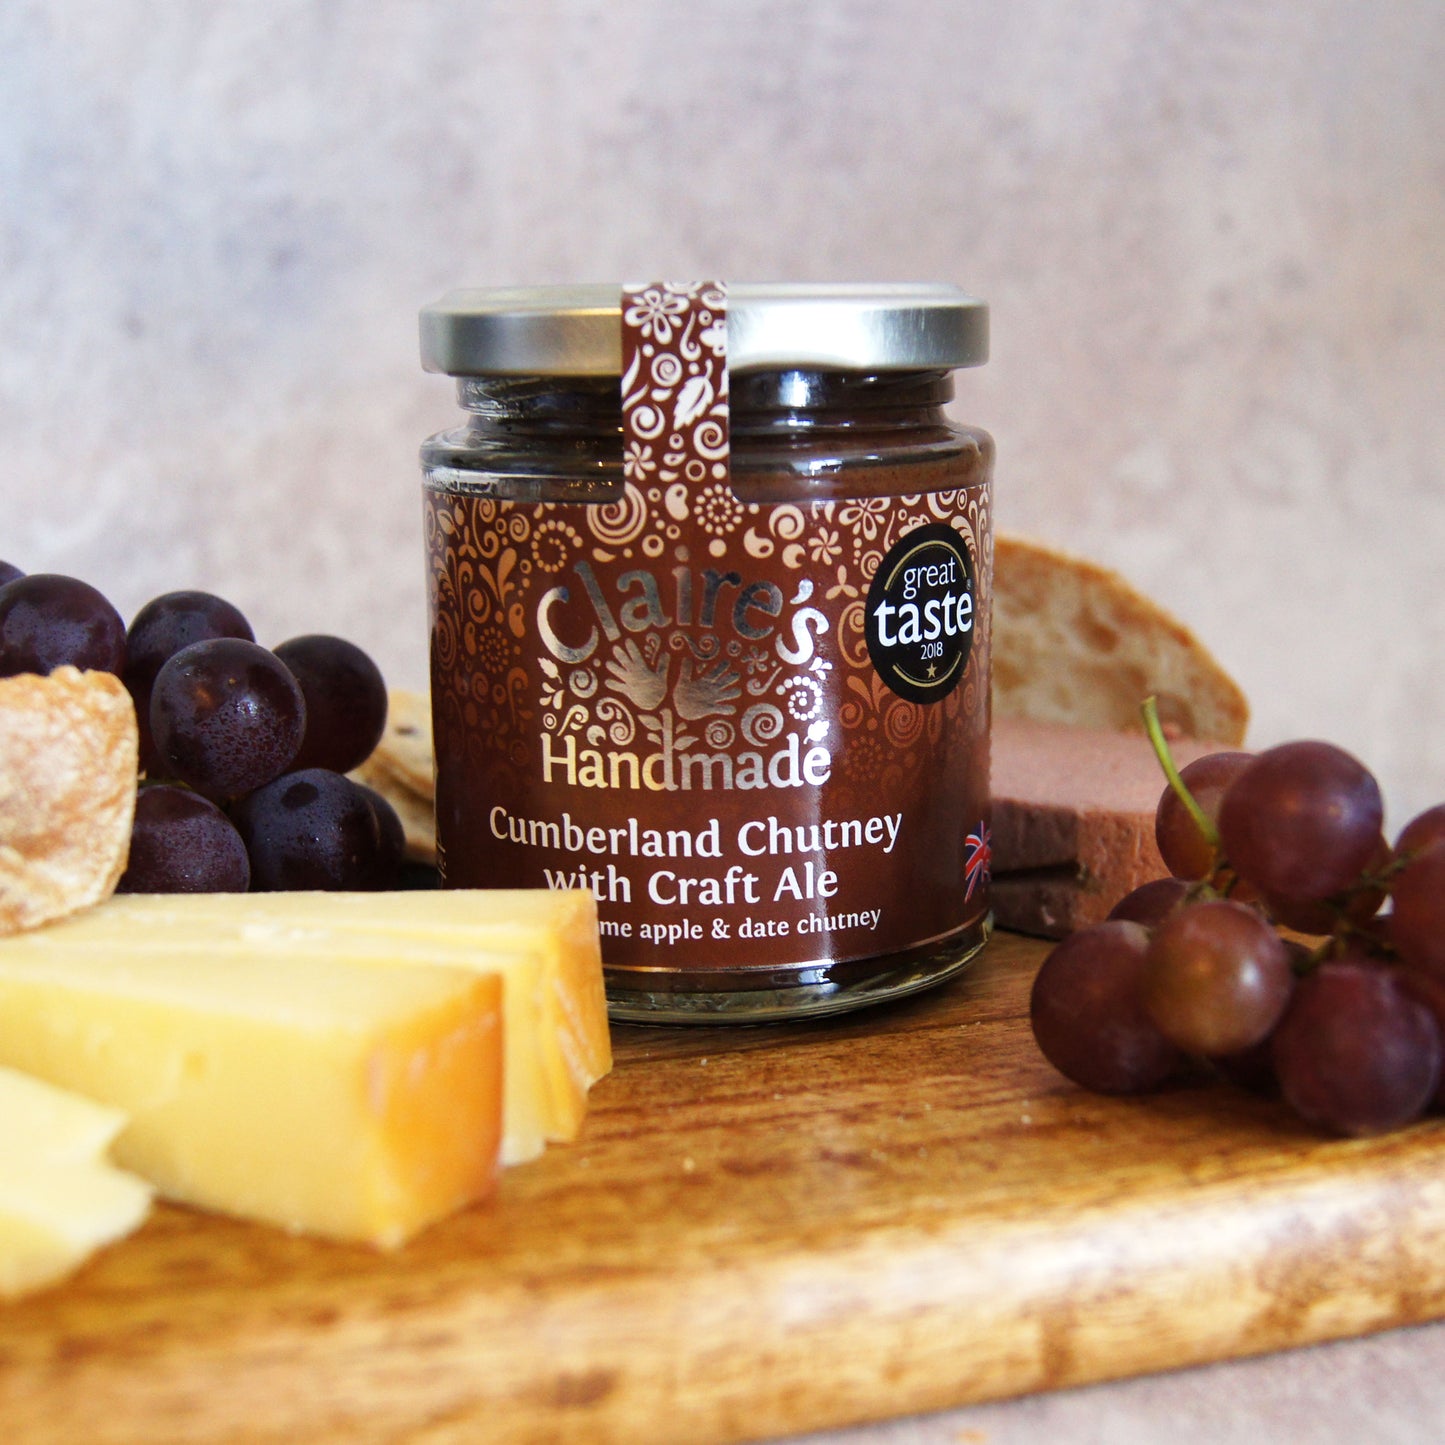 Claire's Handmade Cumberland Chutney with Craft Ale 200g